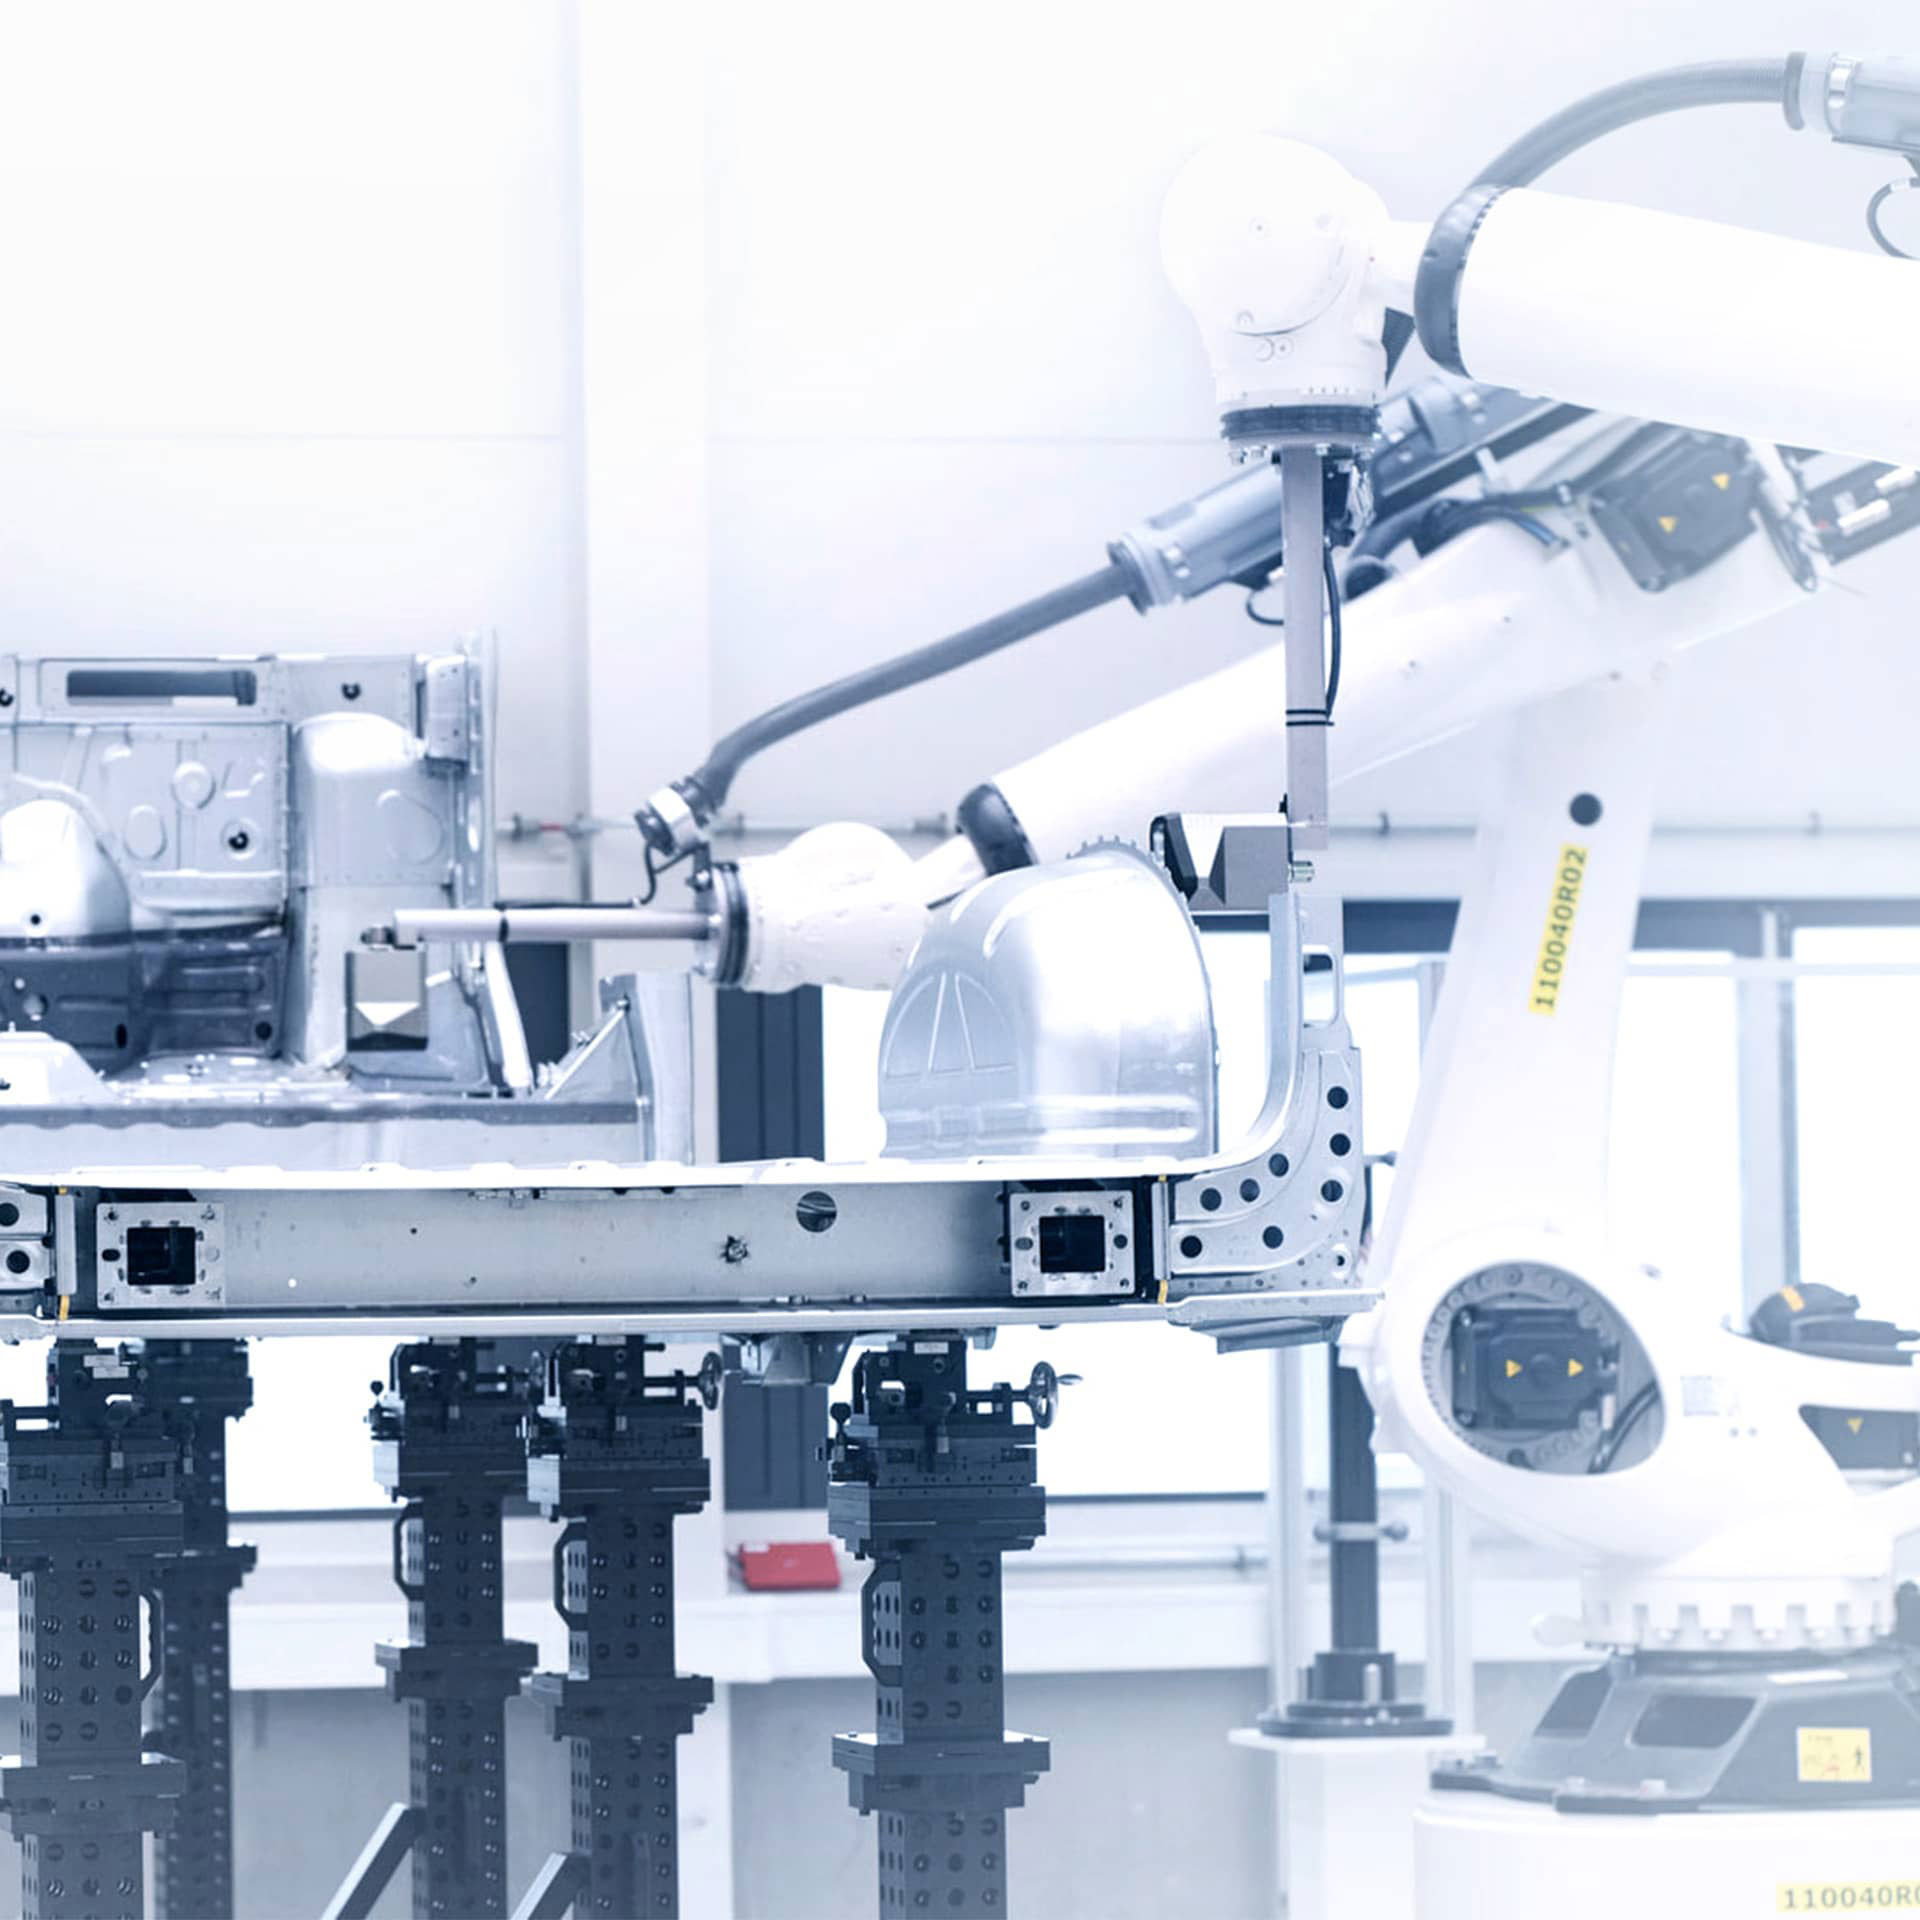 ZEISS Digital Innovation Manufacturing Solutions